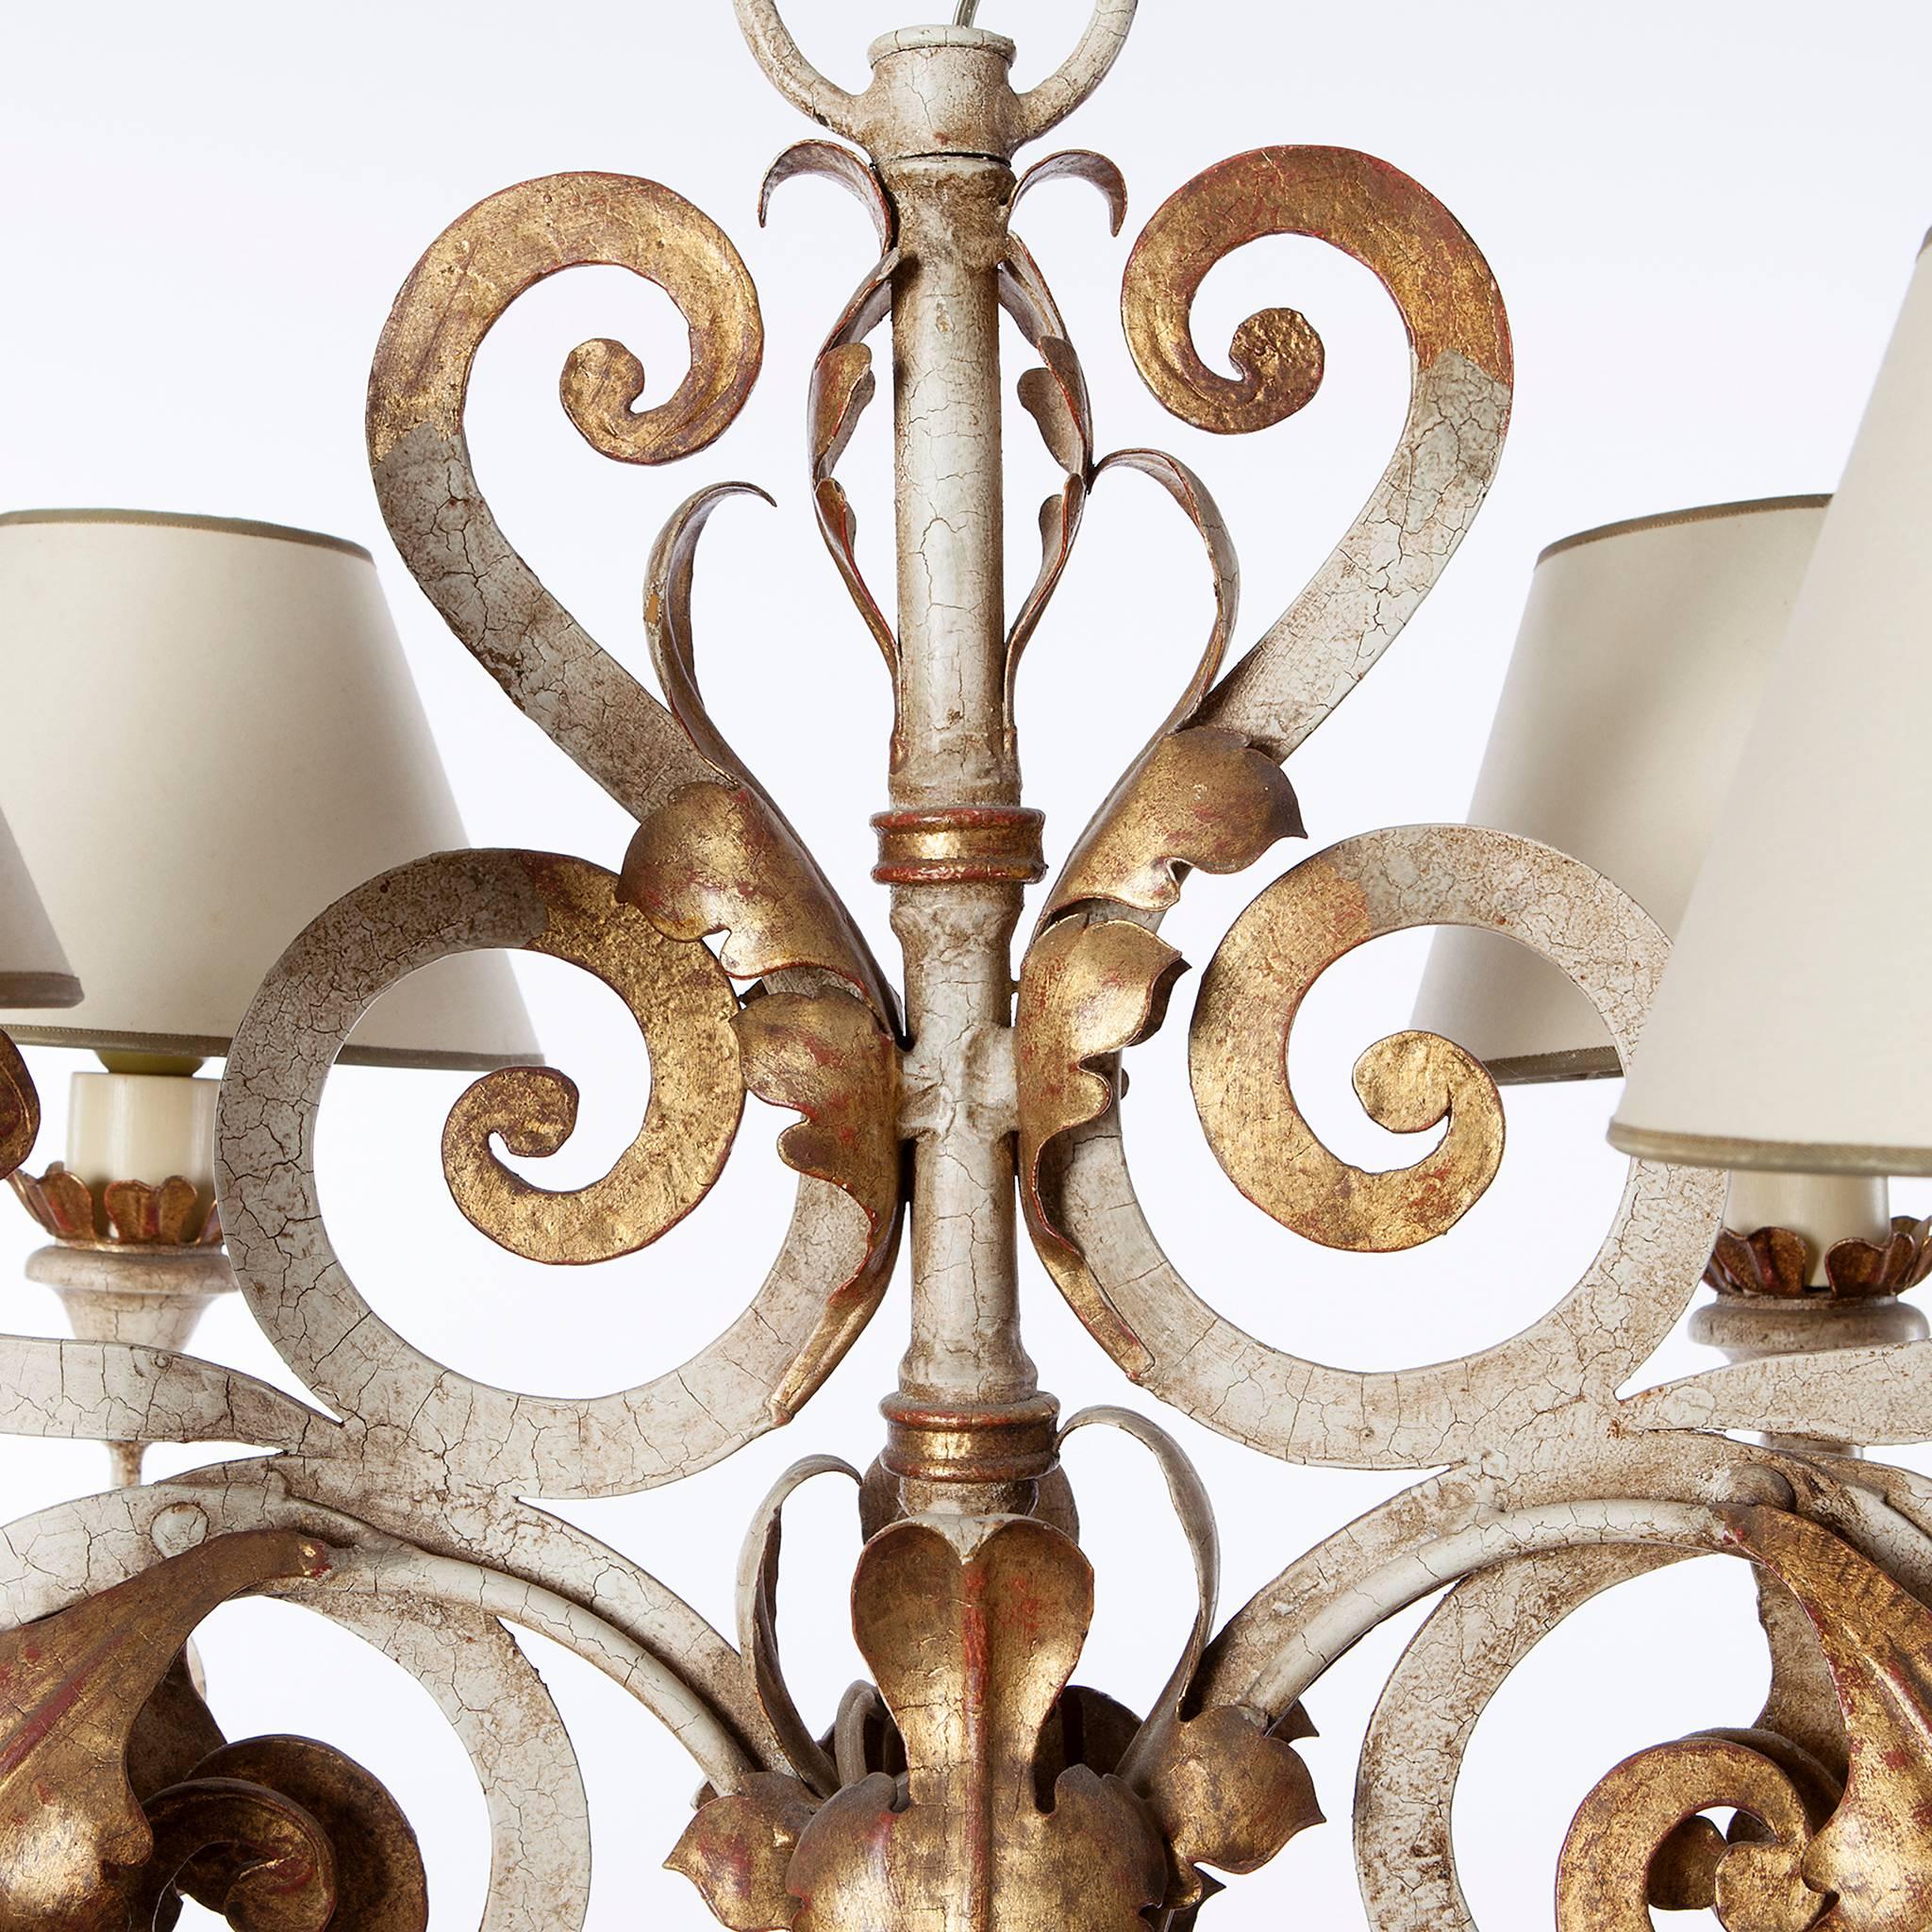 This rare chandelier by Caldwell from circa 1900s is in excellent condition. A four-light polychrome gold-plated wrought iron chandelier suits every room.